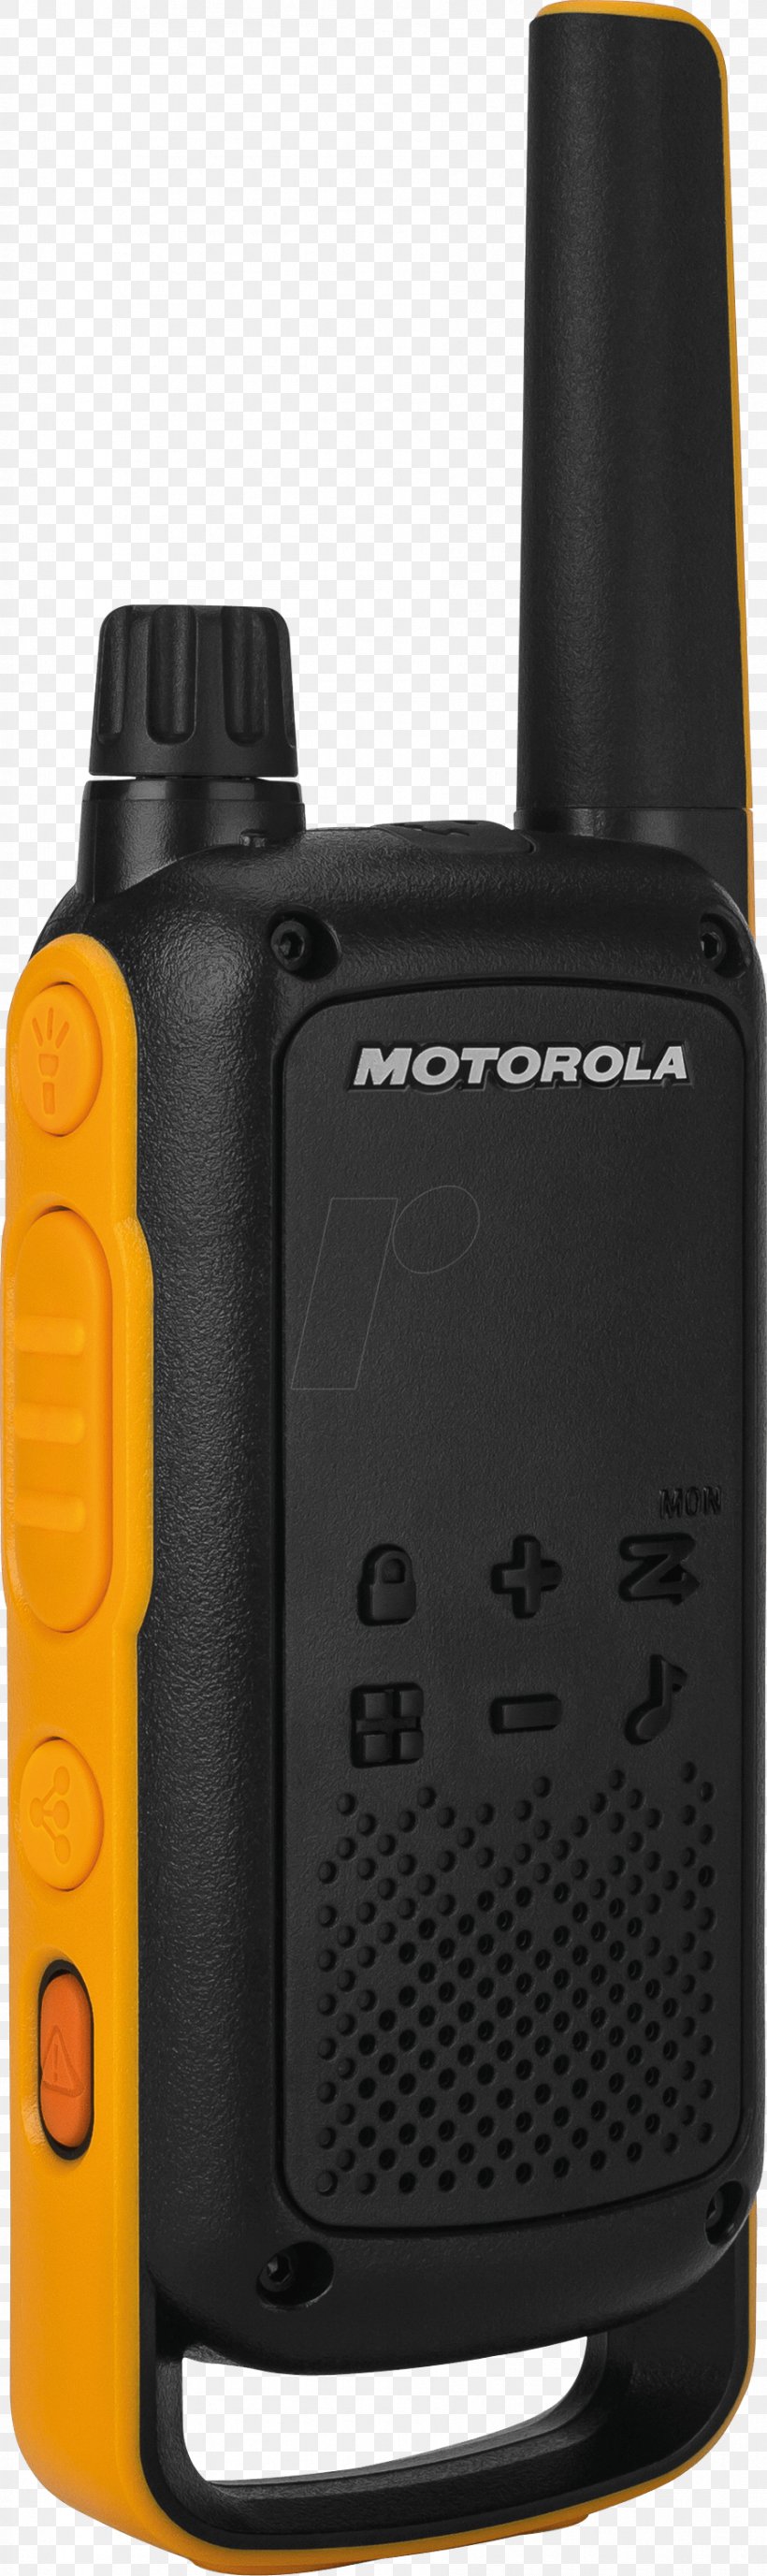 Motorola Talkabout T82 Extreme 188069 PMR446 Walkie-talkie Two-way Radio Professional Mobile Radio, PNG, 893x2999px, Walkietalkie, Communication Channel, Communication Device, Electronic Device, Electronics Download Free